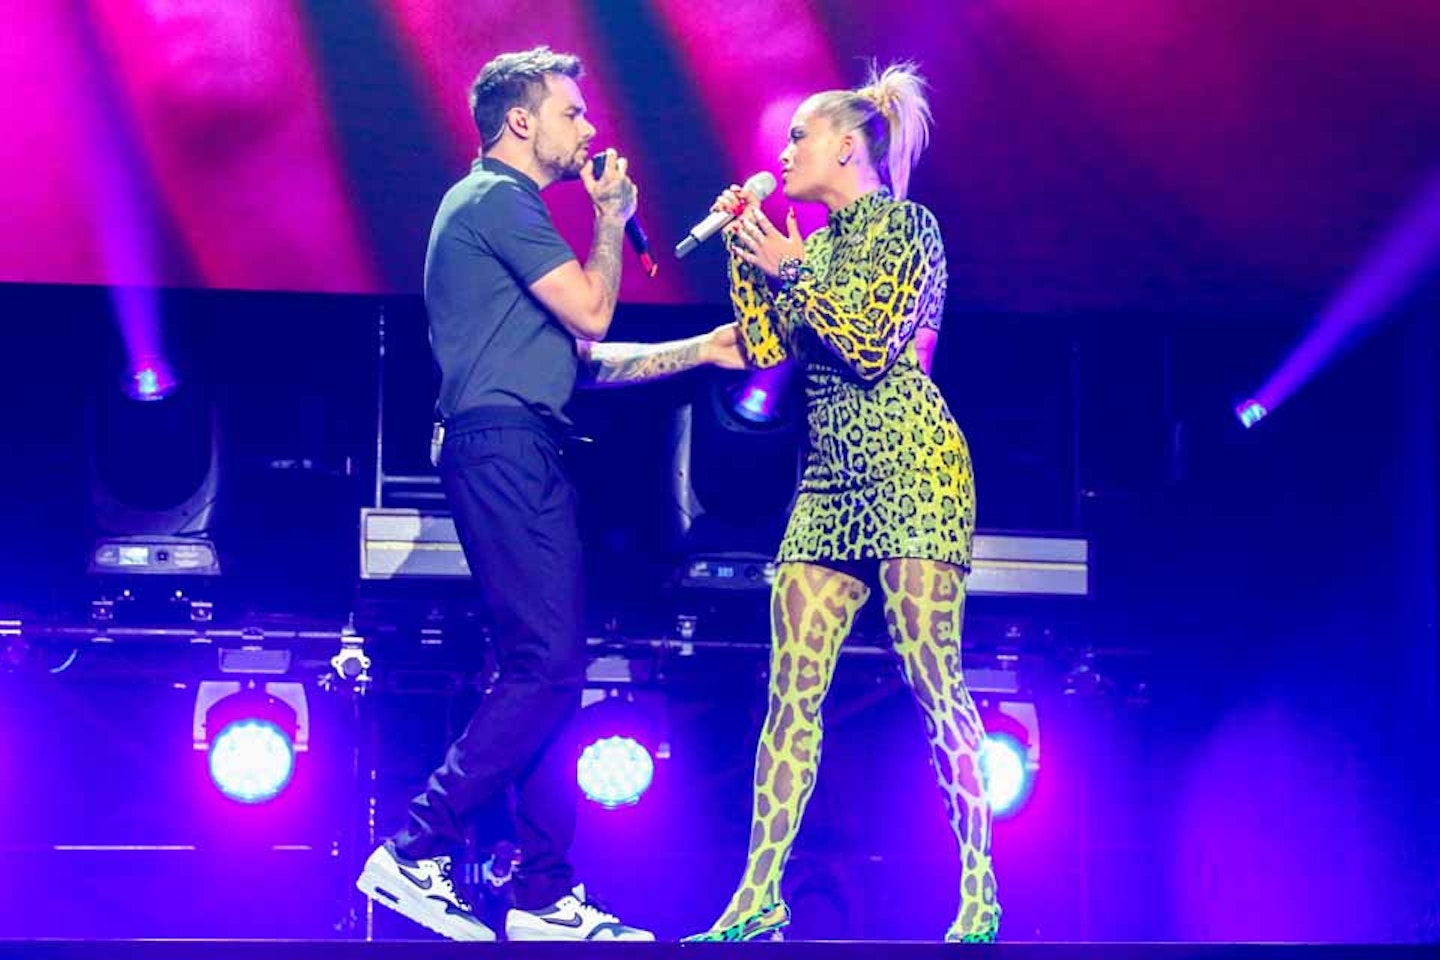 Liam teamed up with Rita Ora on 'For You'